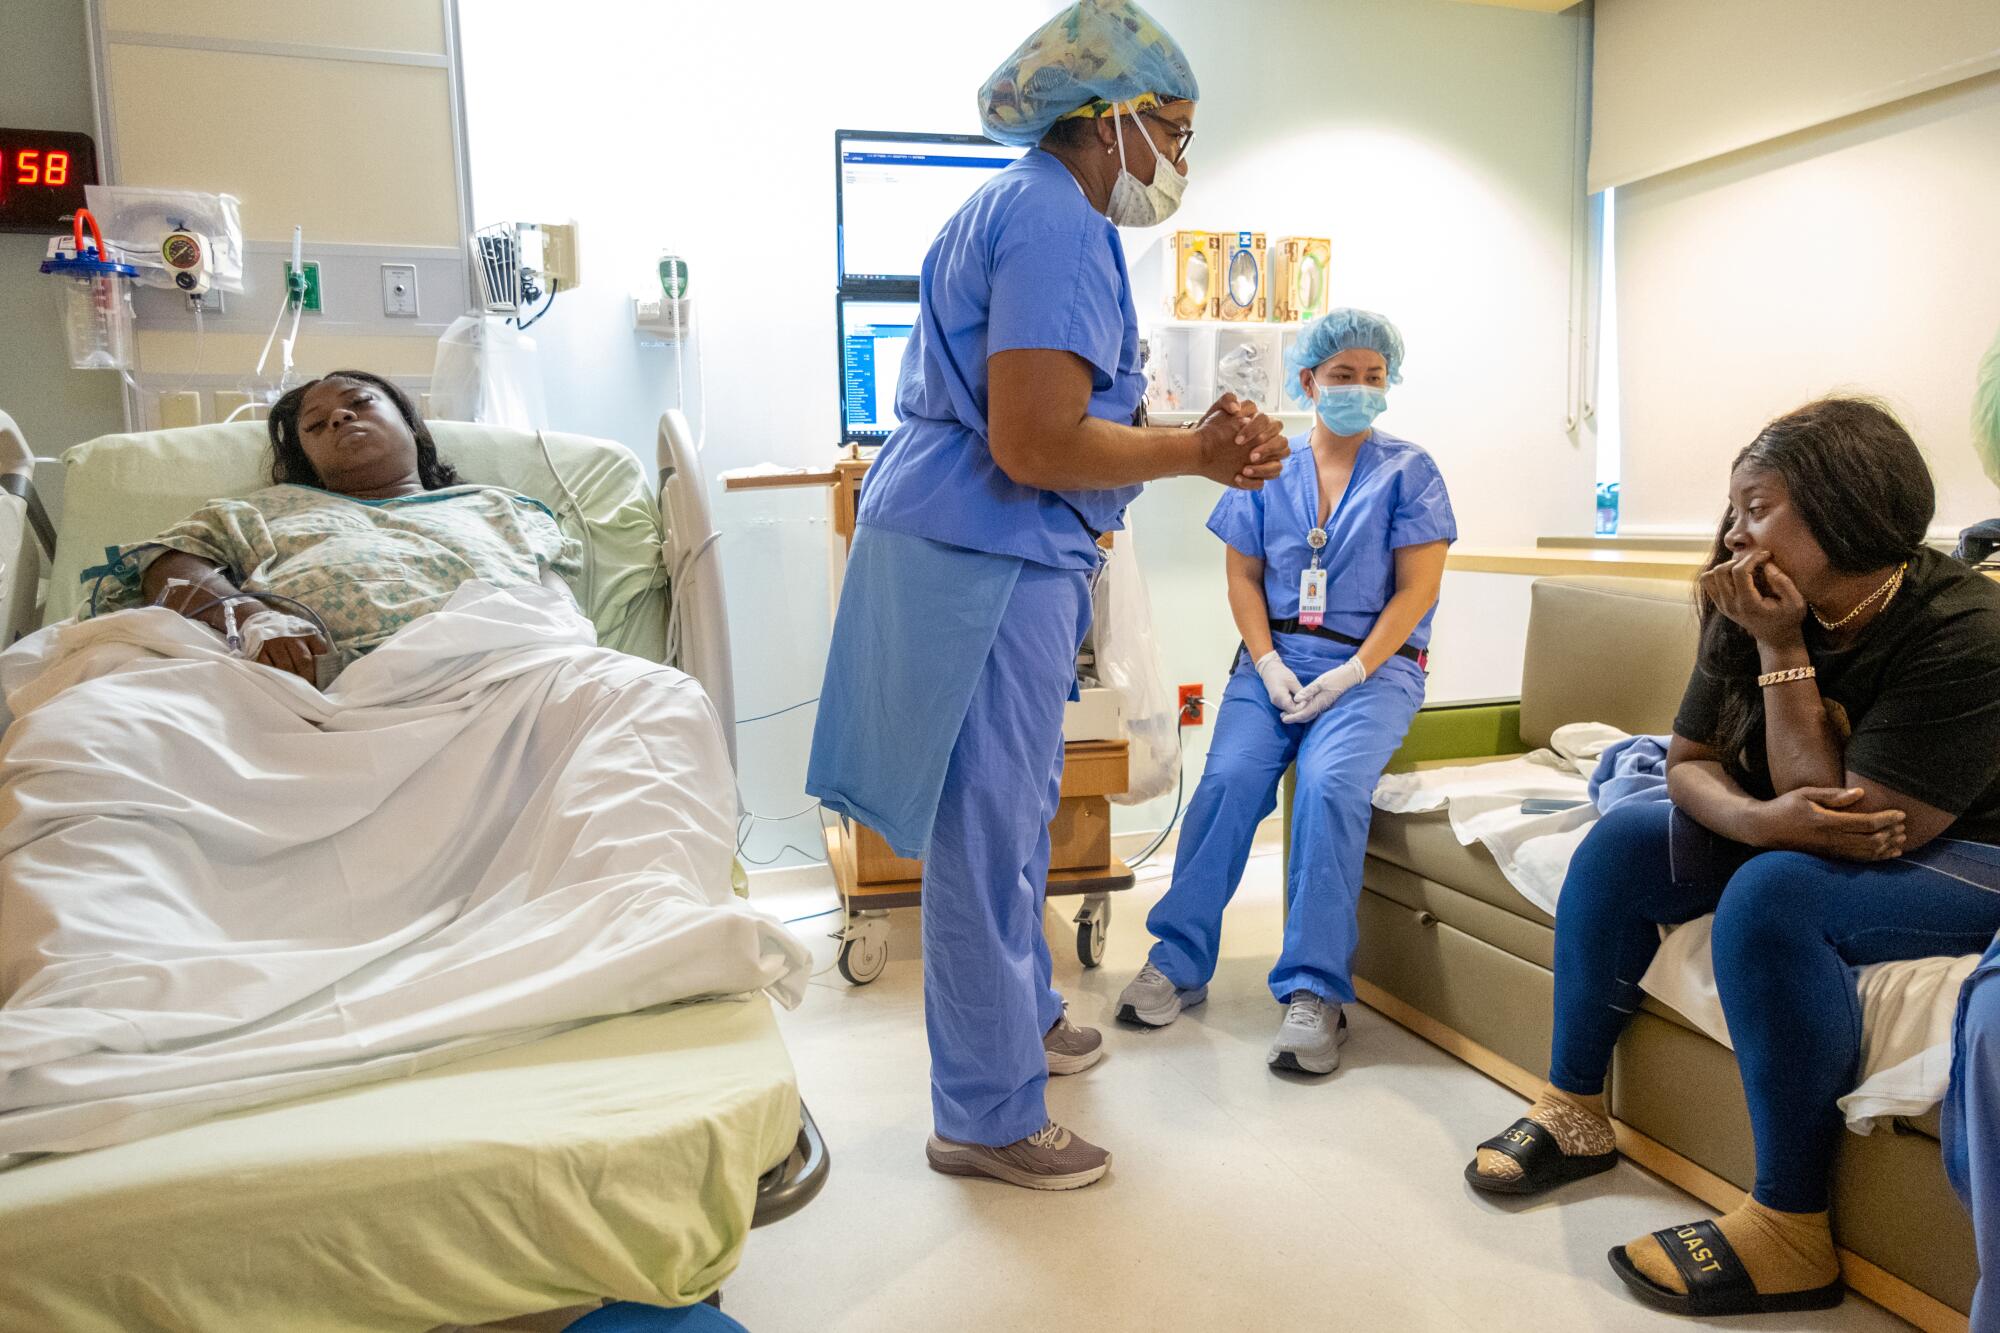 Two women in nursing scrubs talk with a seated woman as another woman lies in bed.